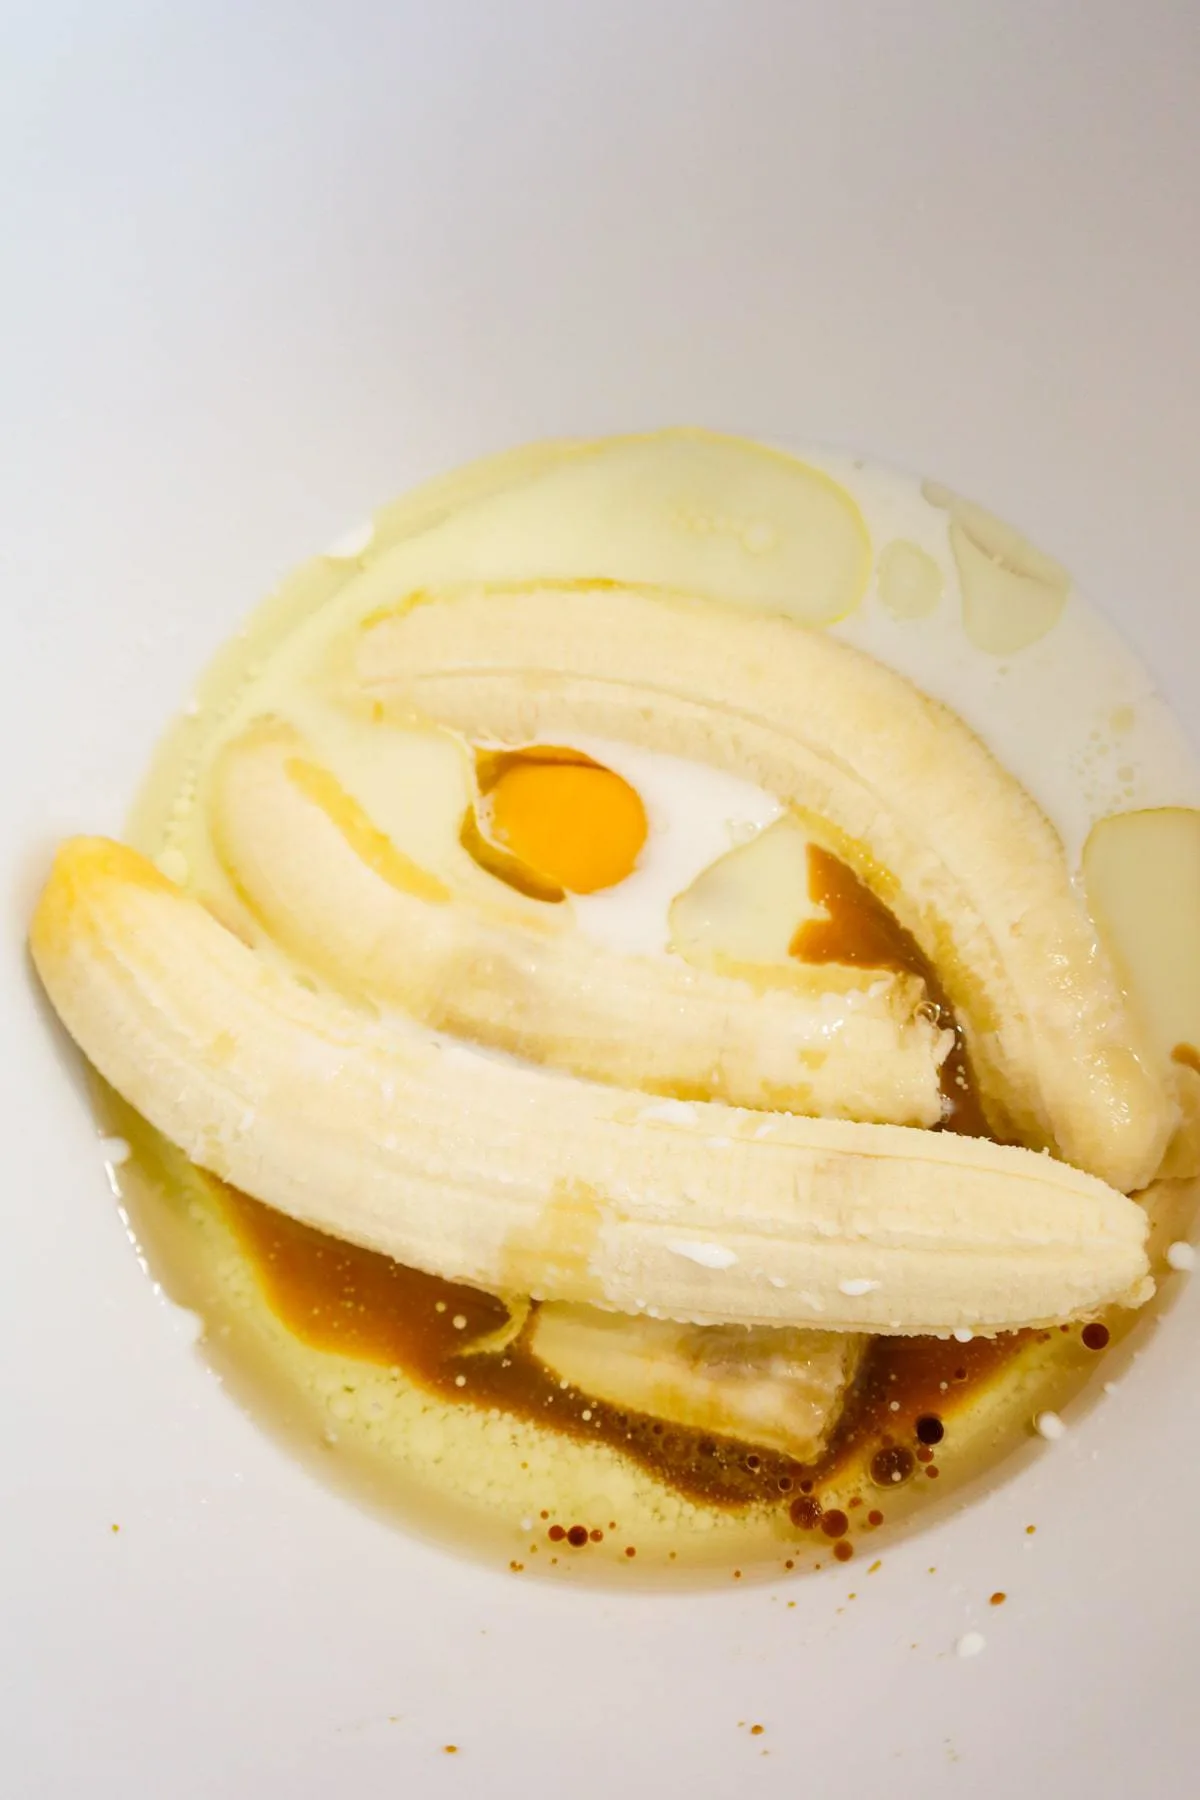 ripe bananas, egg, milk, oil and vanilla extract in a mixing bowl